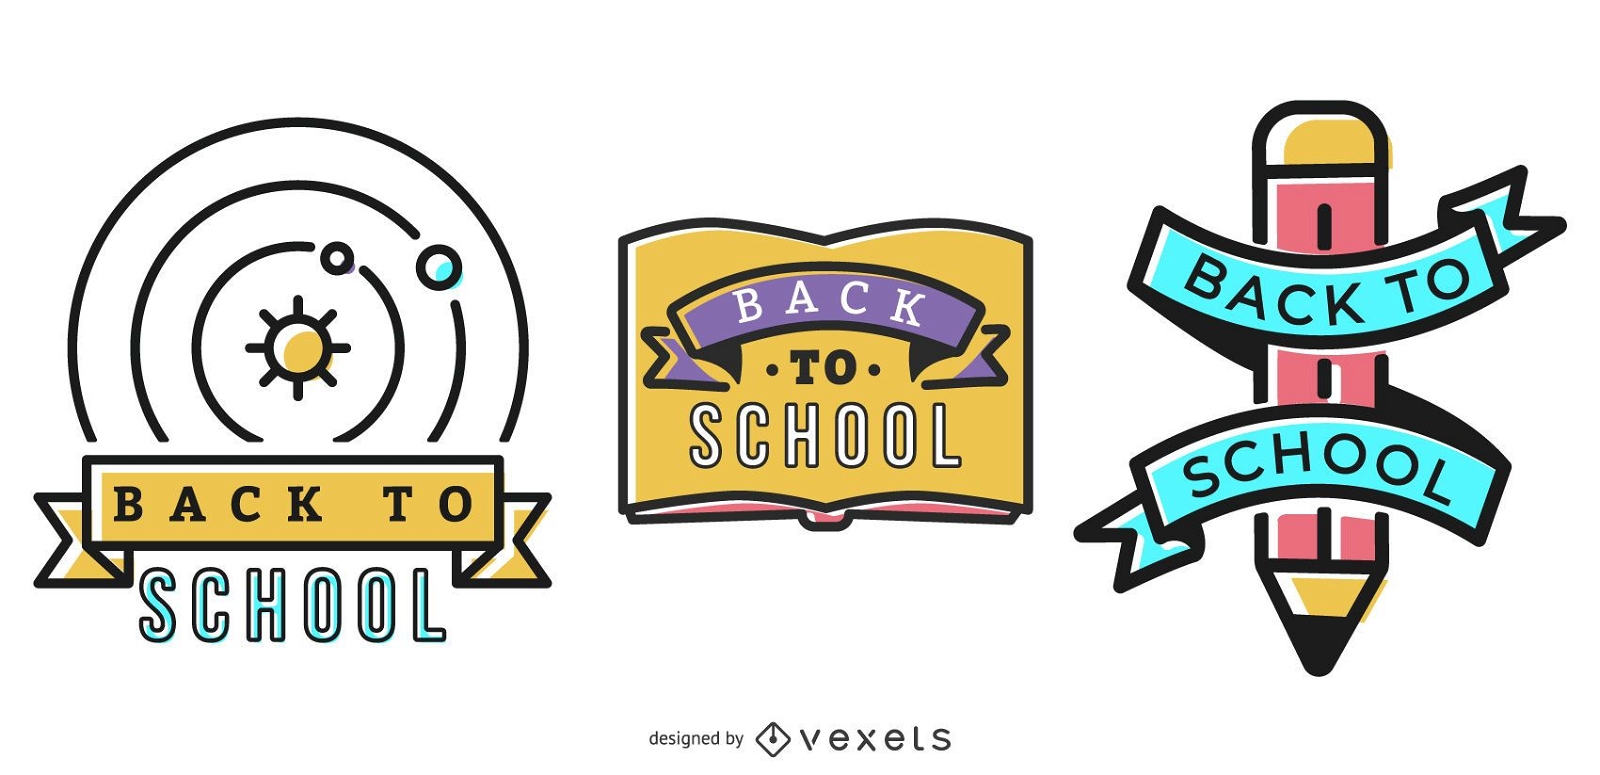 Back to School quote badges set